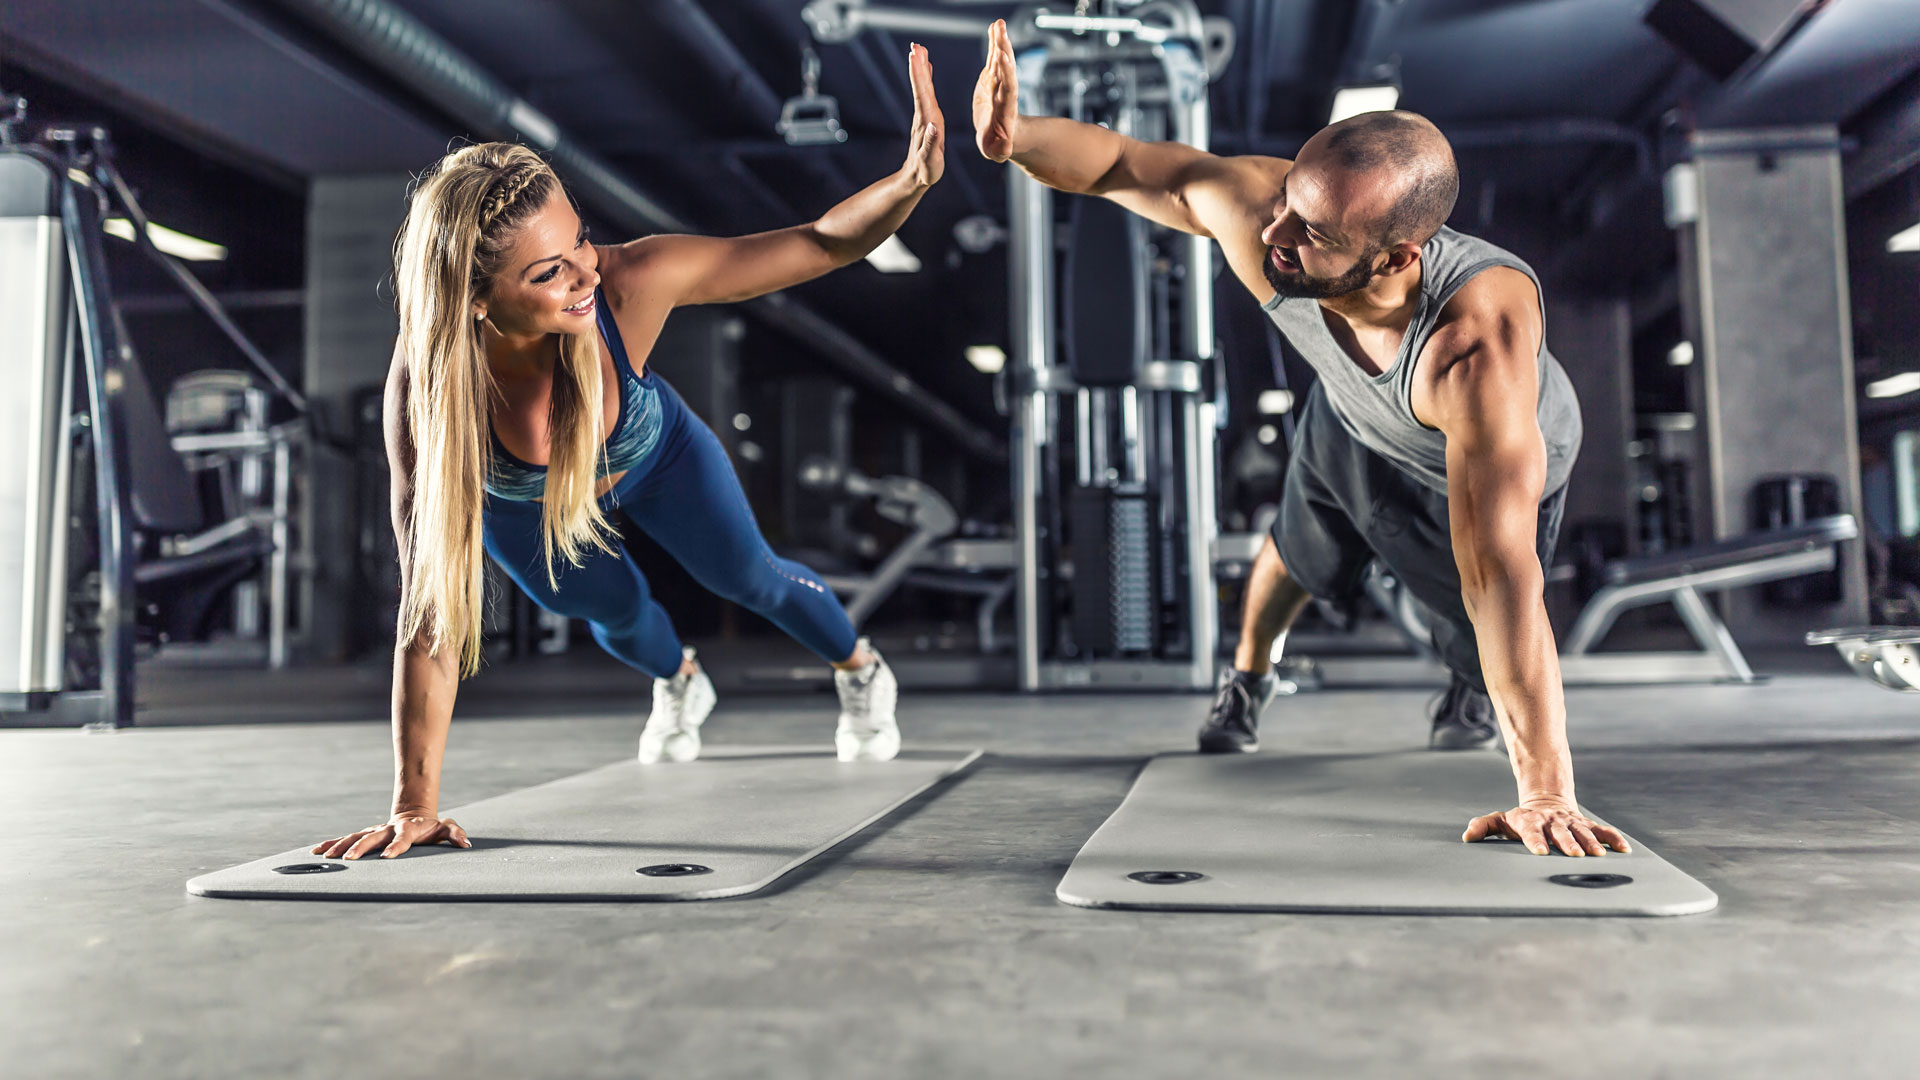 The Benefits of Having a Personal Trainer: Customized Workouts